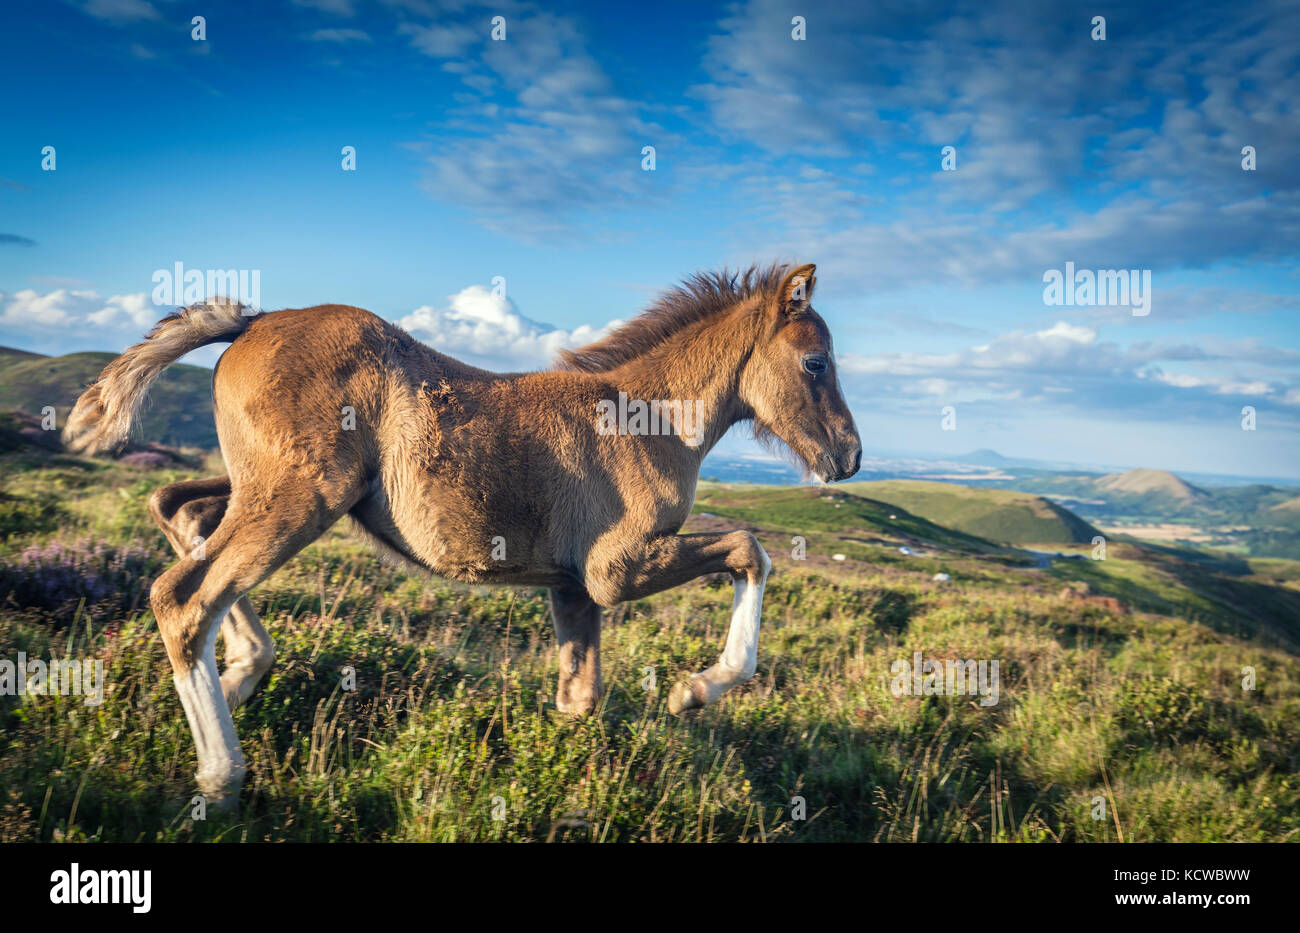 Cute Foal Running Wild on Scenic Hilly Land Stock Photo